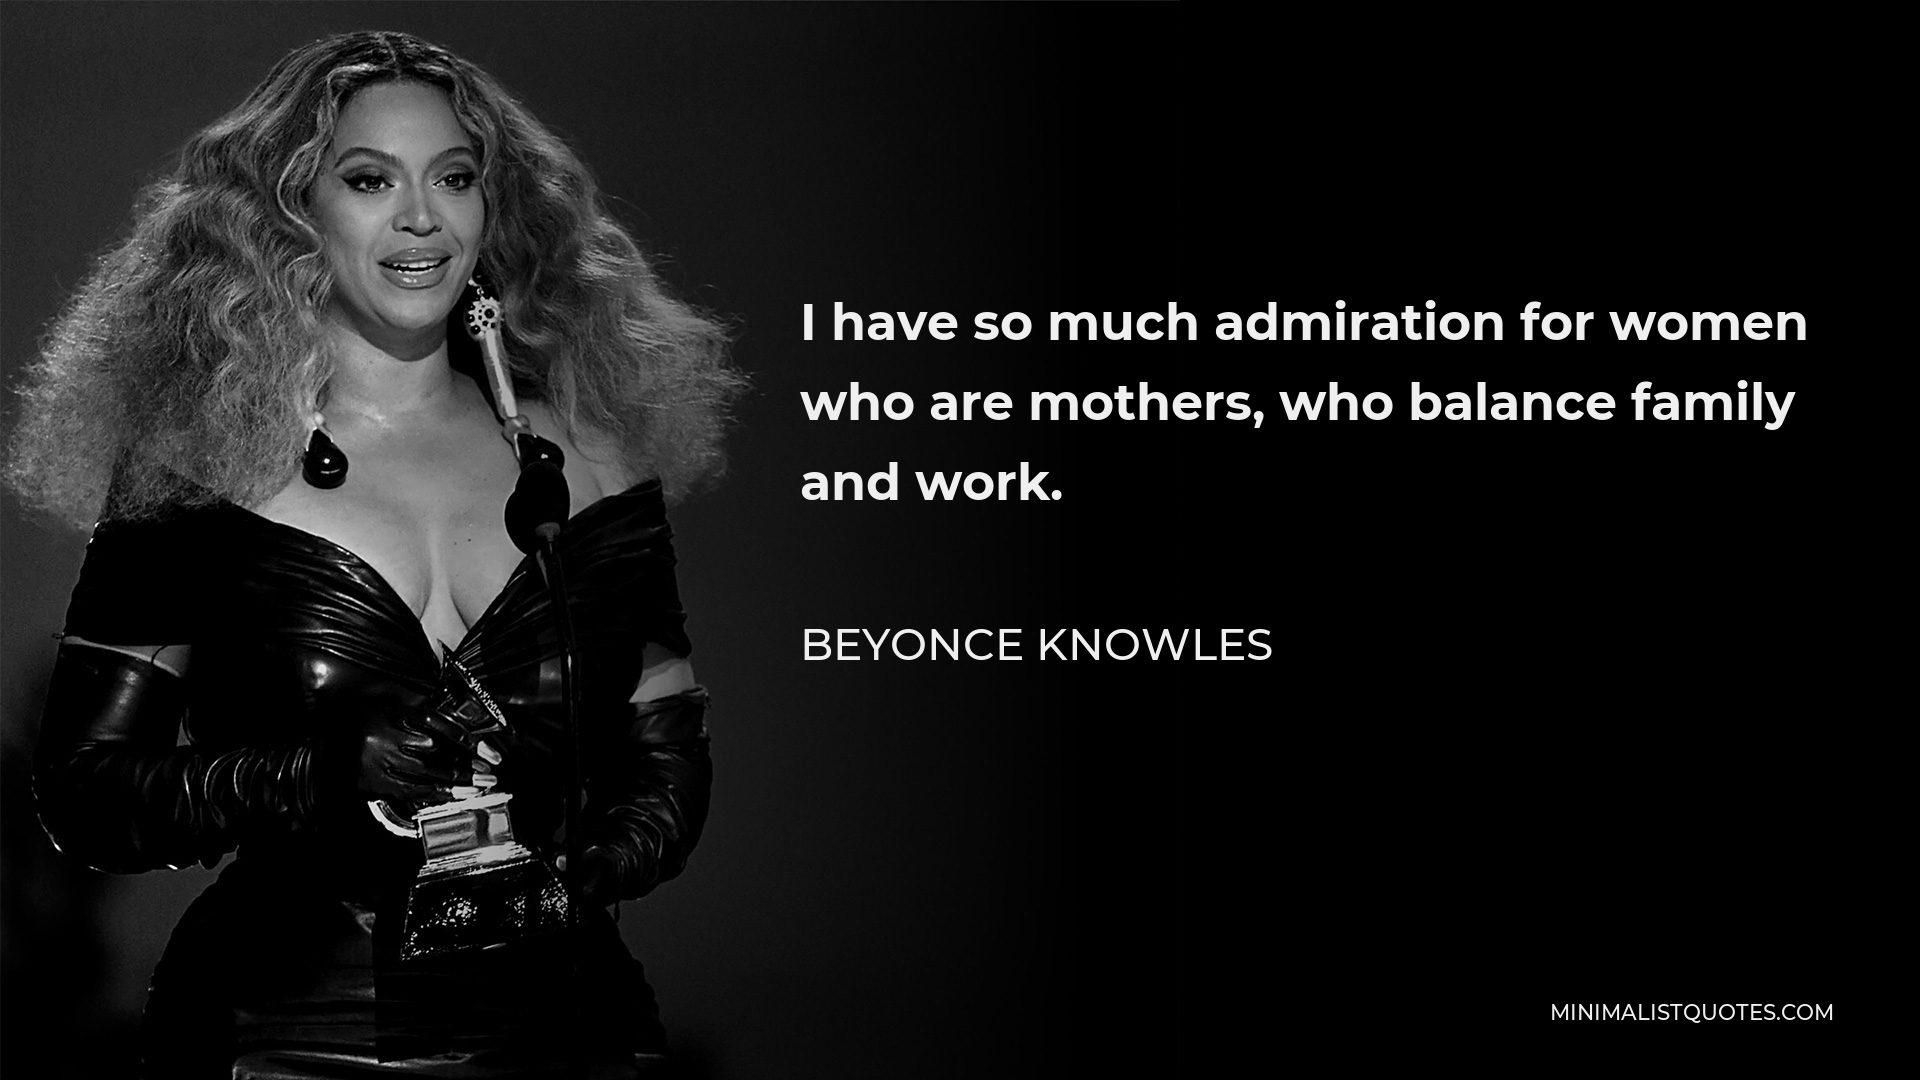 Beyonce Knowles Quote - I have so much admiration for women who are mothers, who balance family and work.